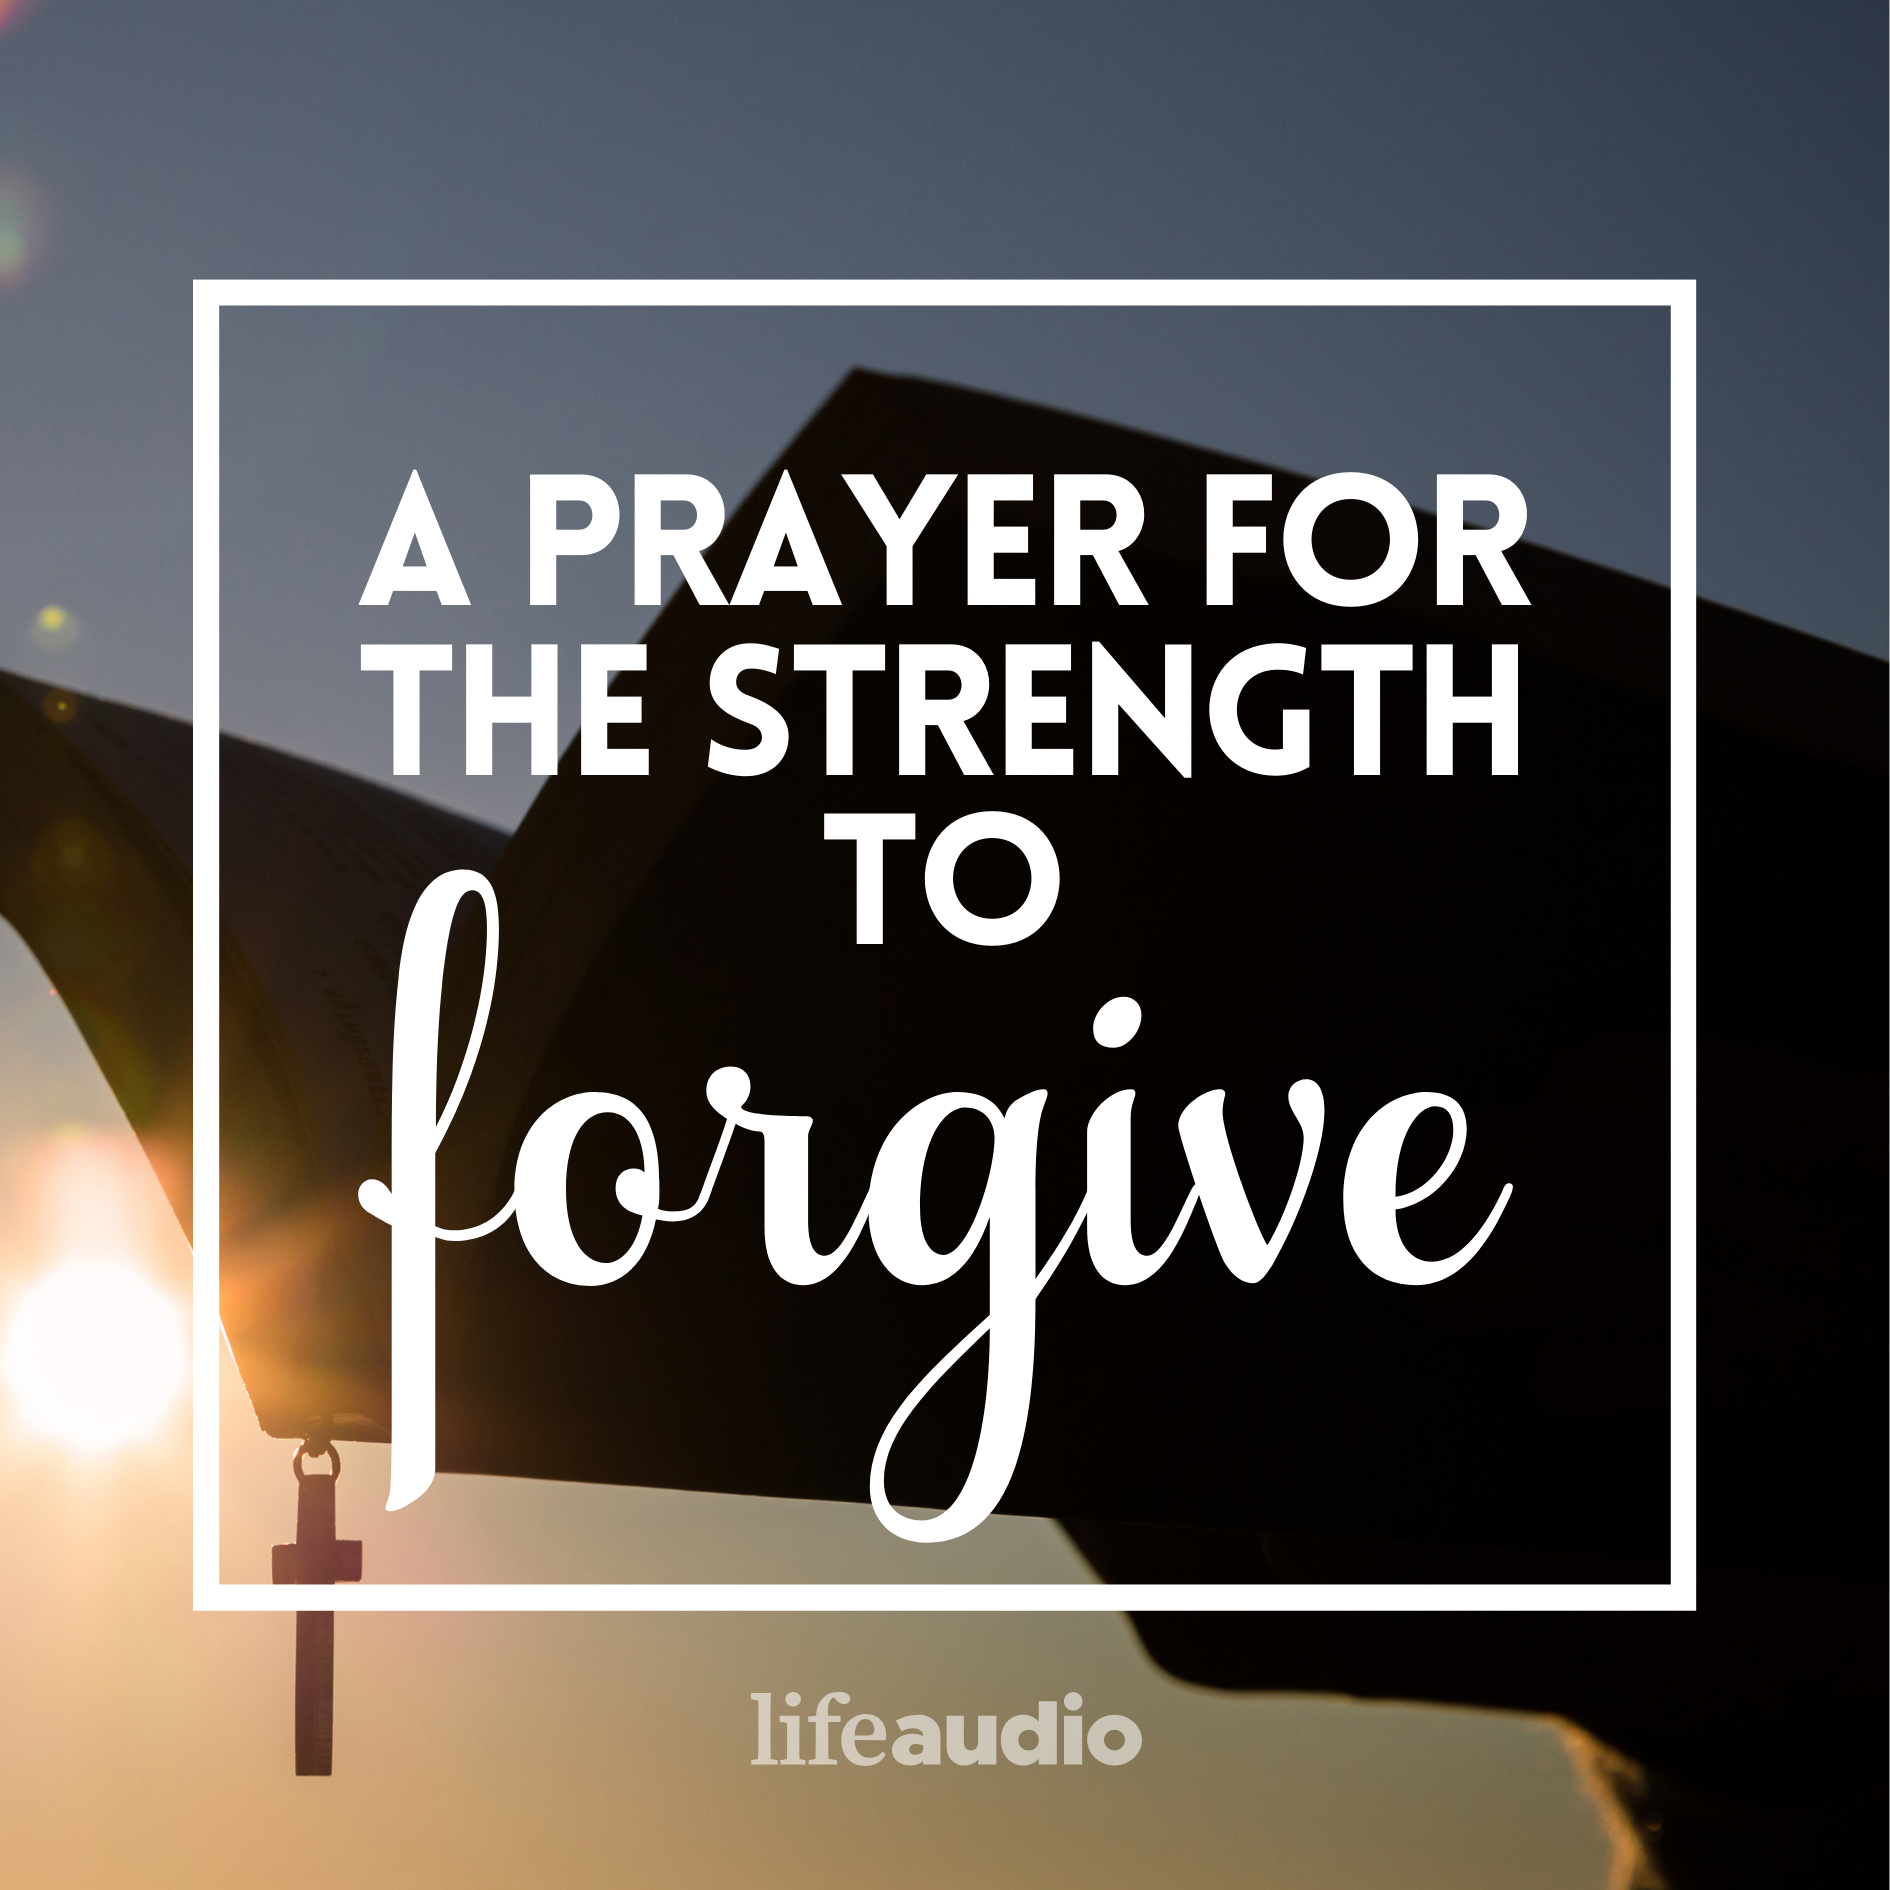 A Prayer for the Strength to Forgive